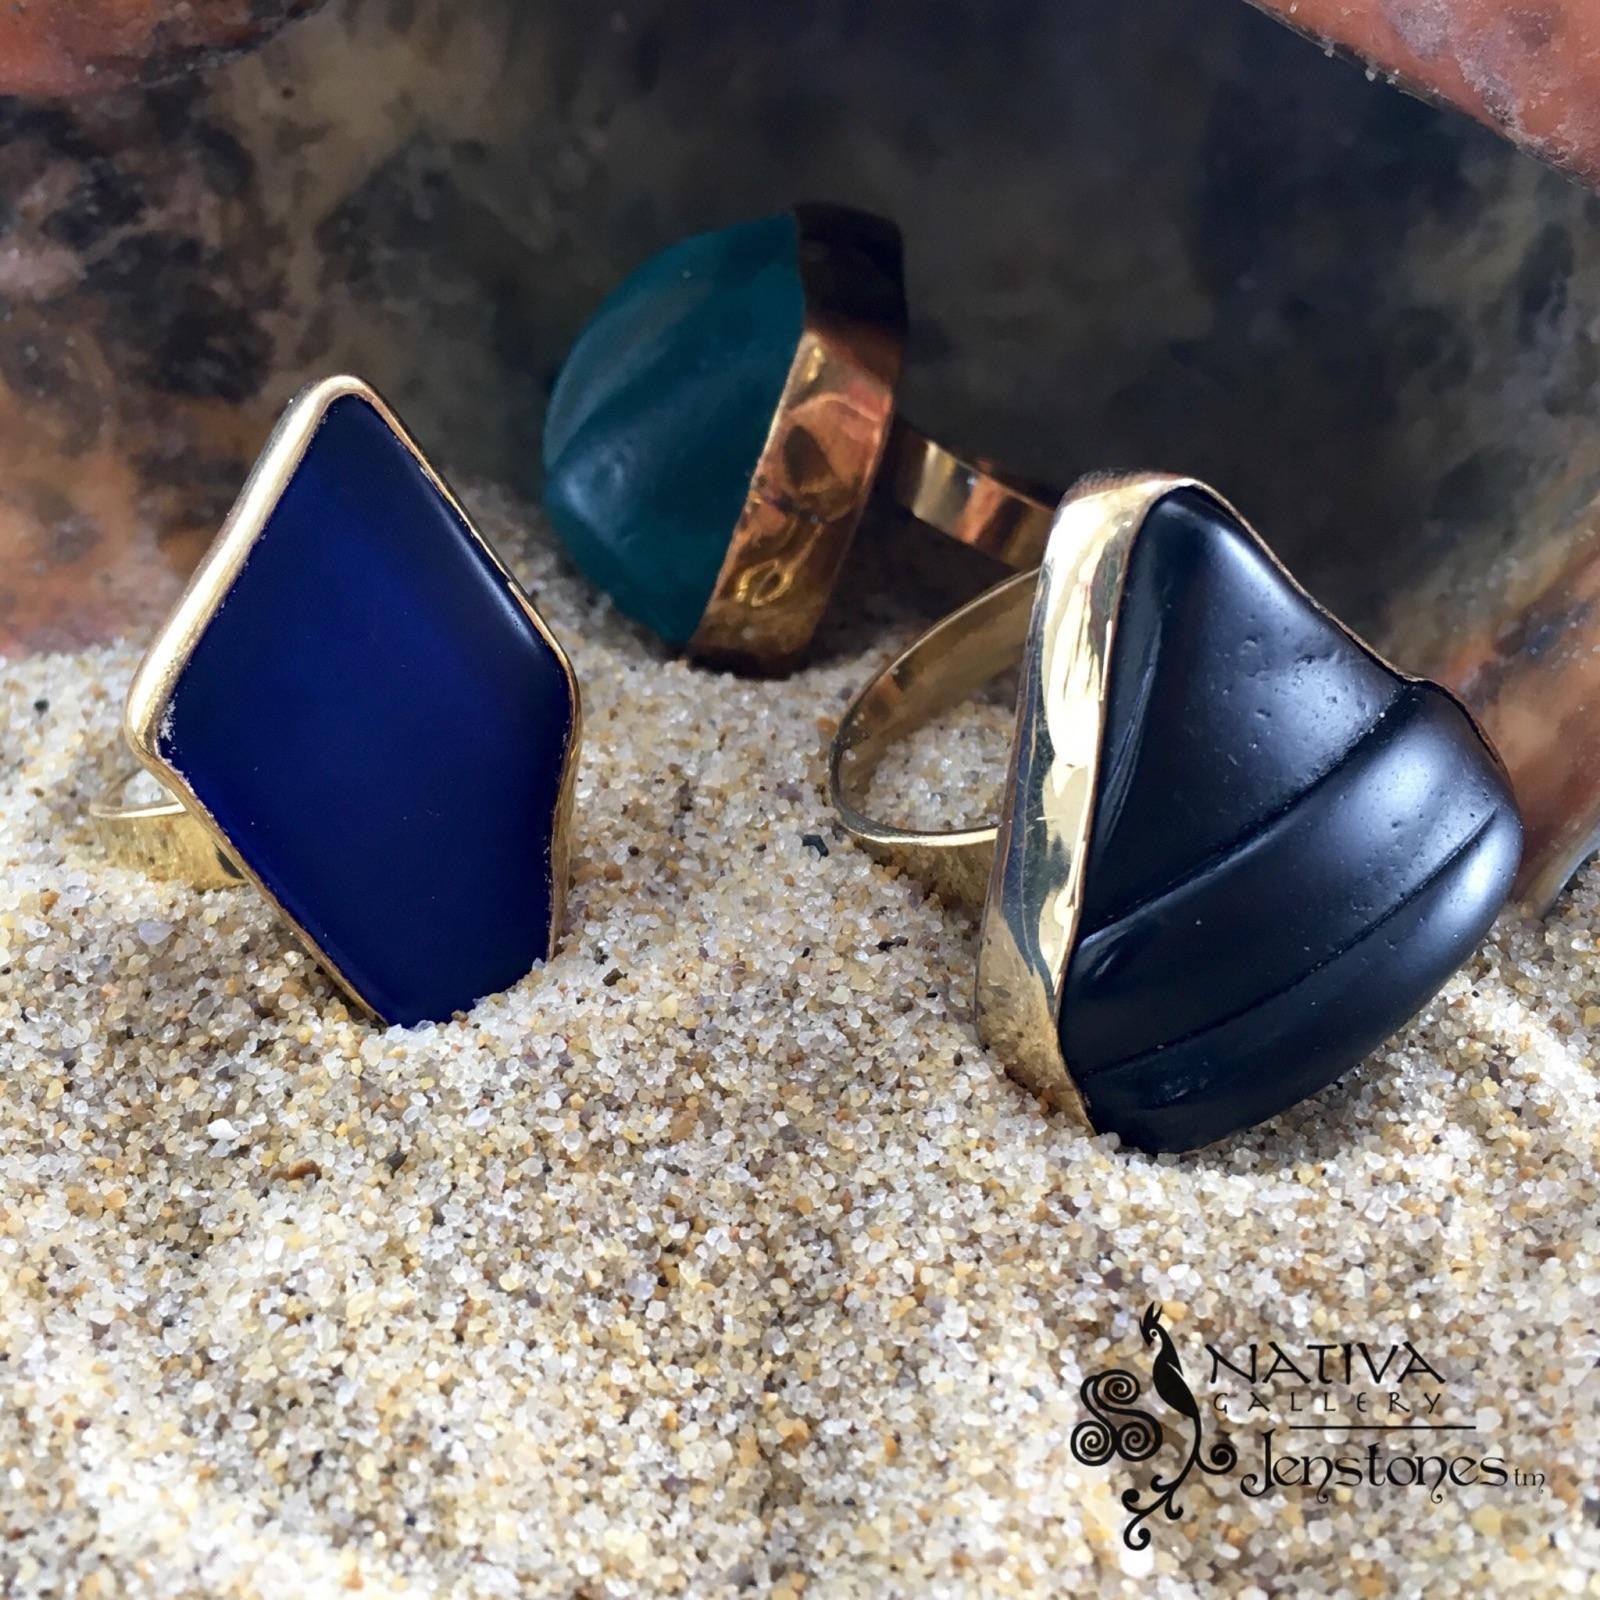 A New Earth: Bronze, Sea Glass and Essential Oils